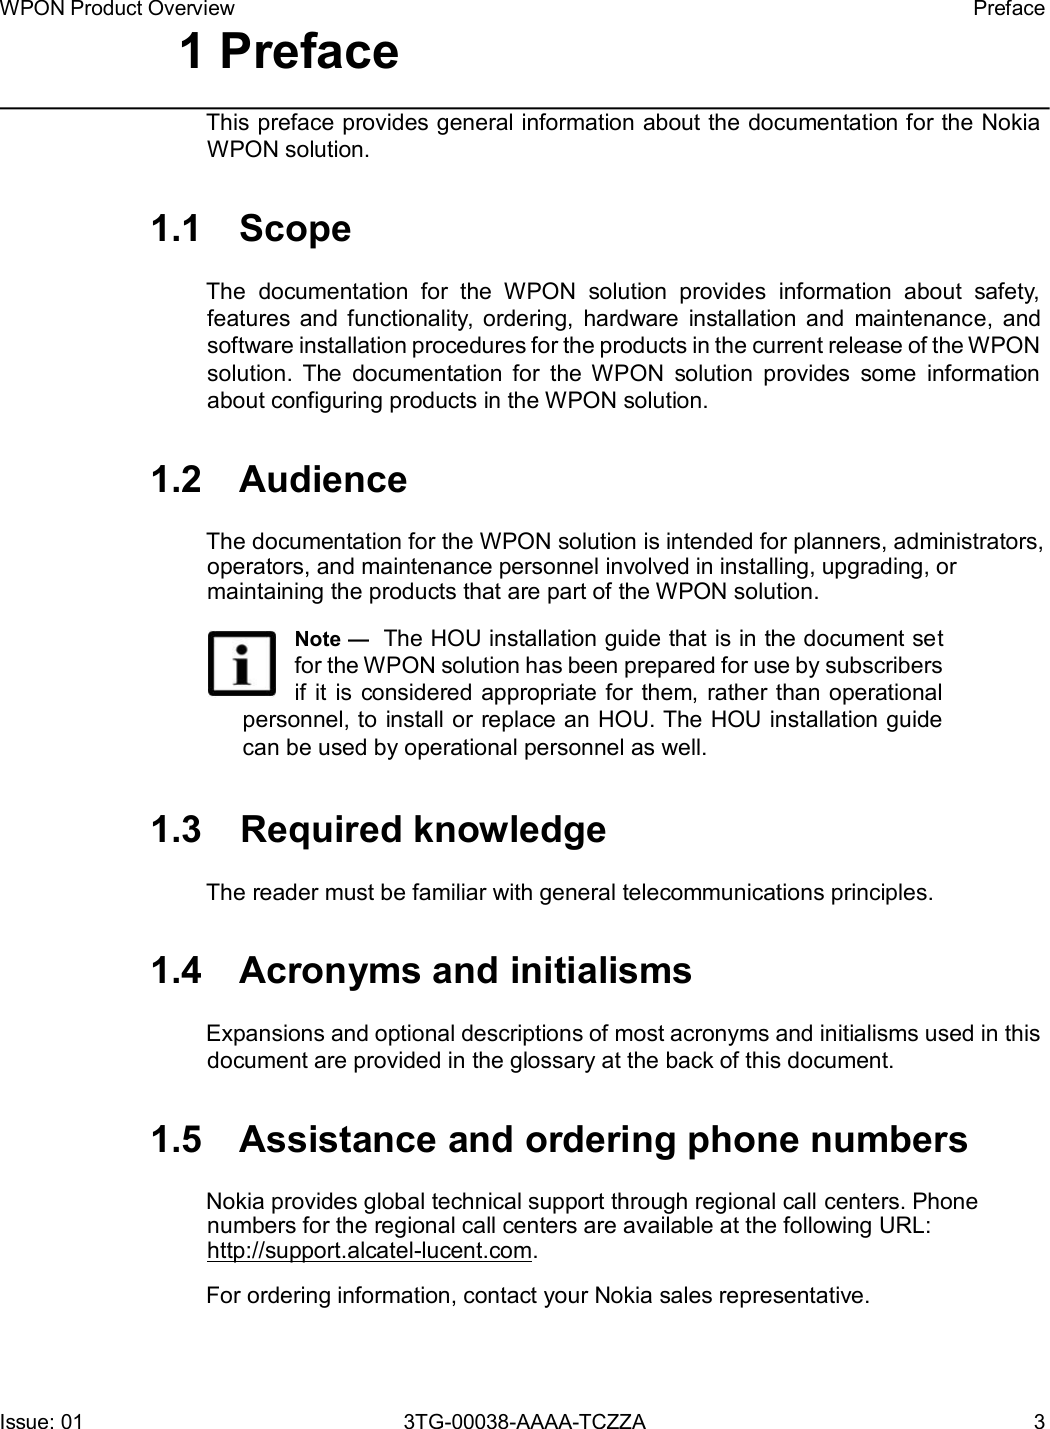 Page 3 of Nokia Bell 7577WPONAPED WPON User Manual WPON Product Overview